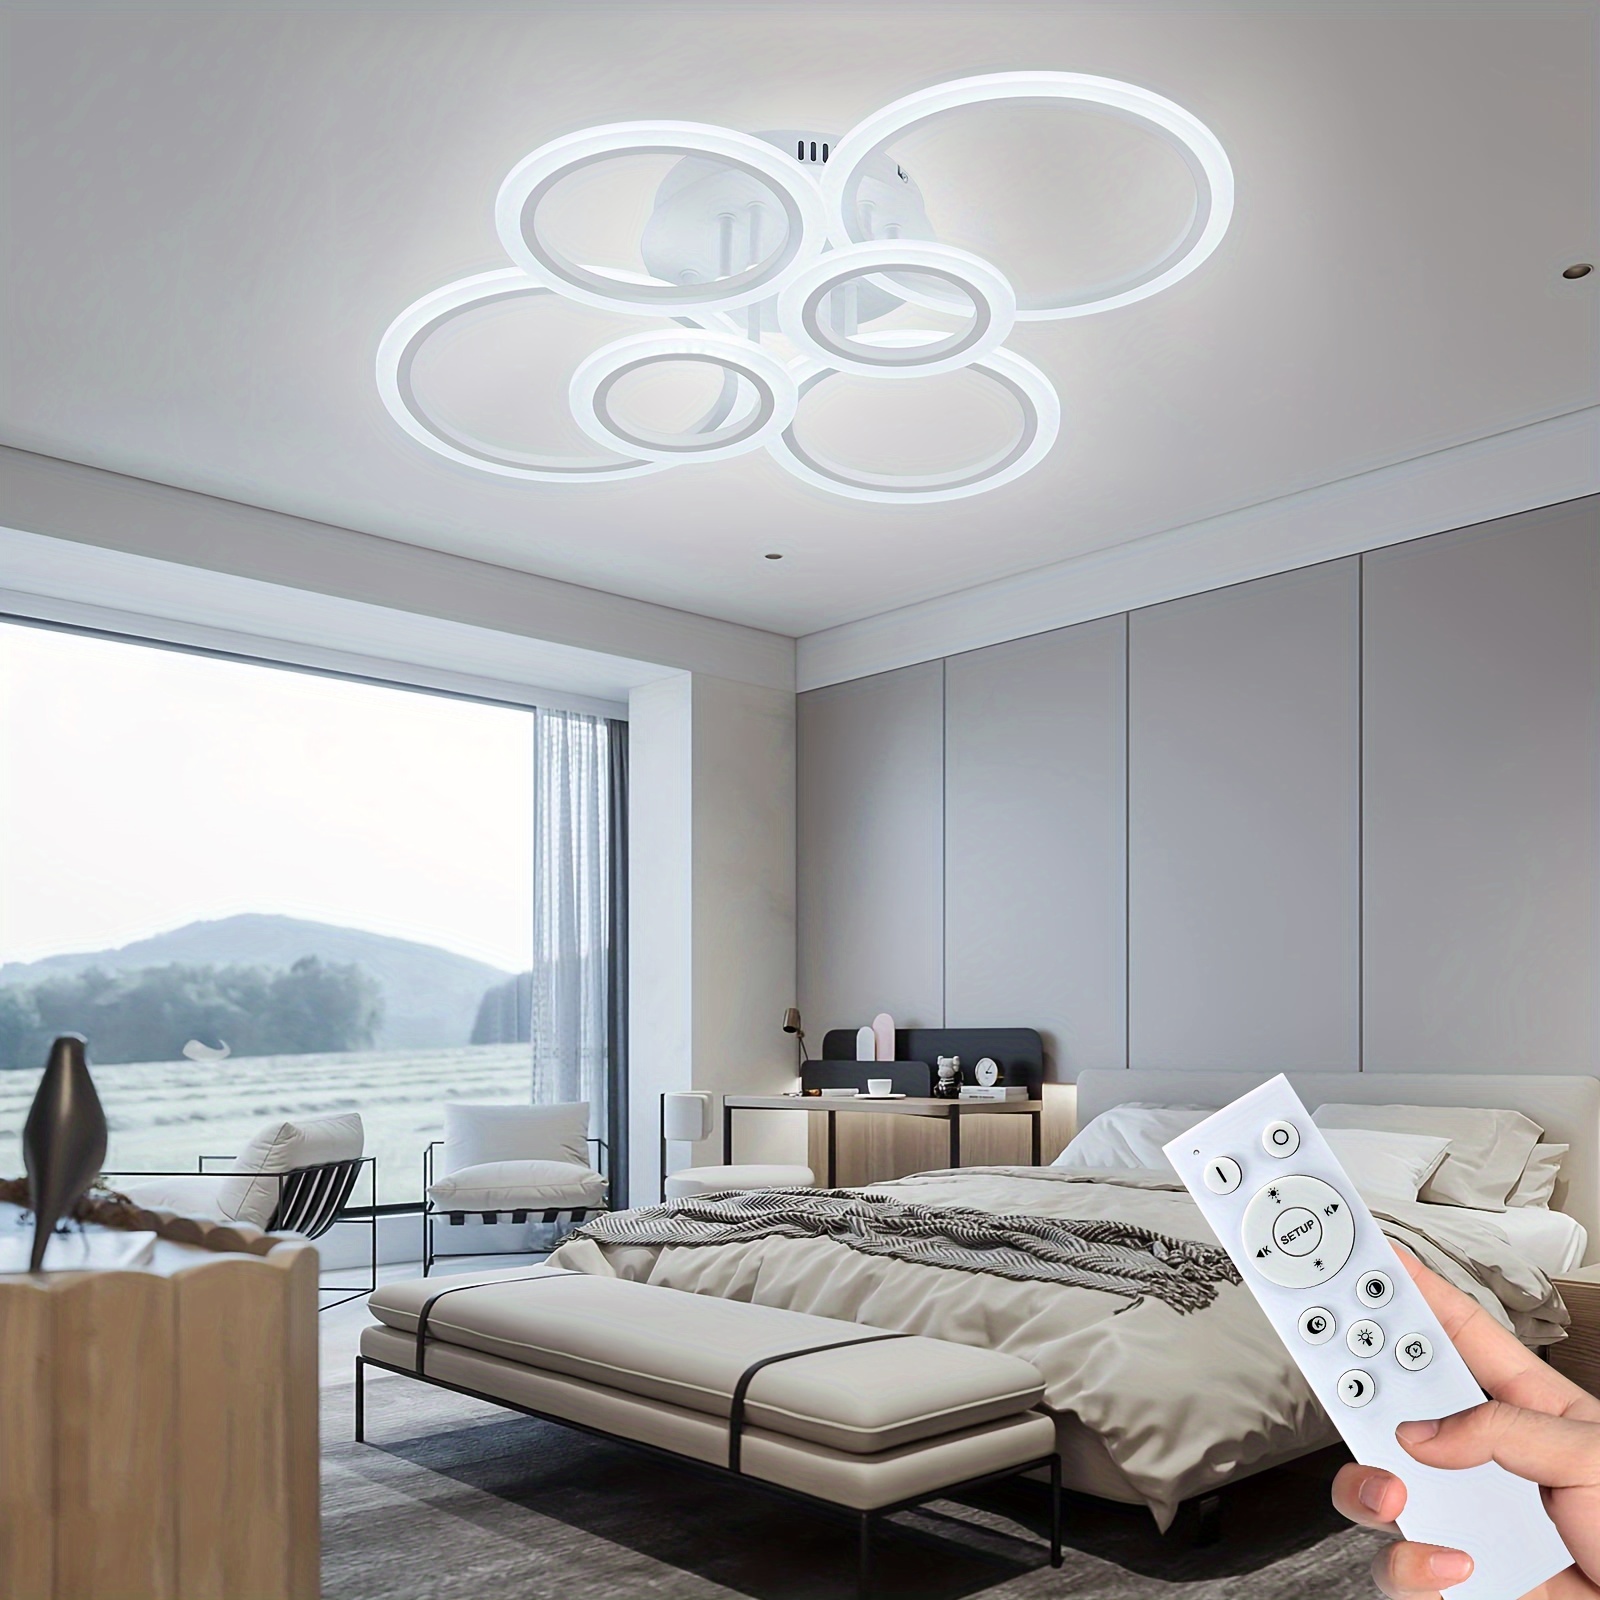 

Led Ceiling Light Fixture, 6 Rings Flush Mount Ceiling Light Dimmable 31" 75w Remote Control Dimmable 3000k-6500k, For Living Room, Kitchen, Bedroom, Office, Ah-yh4